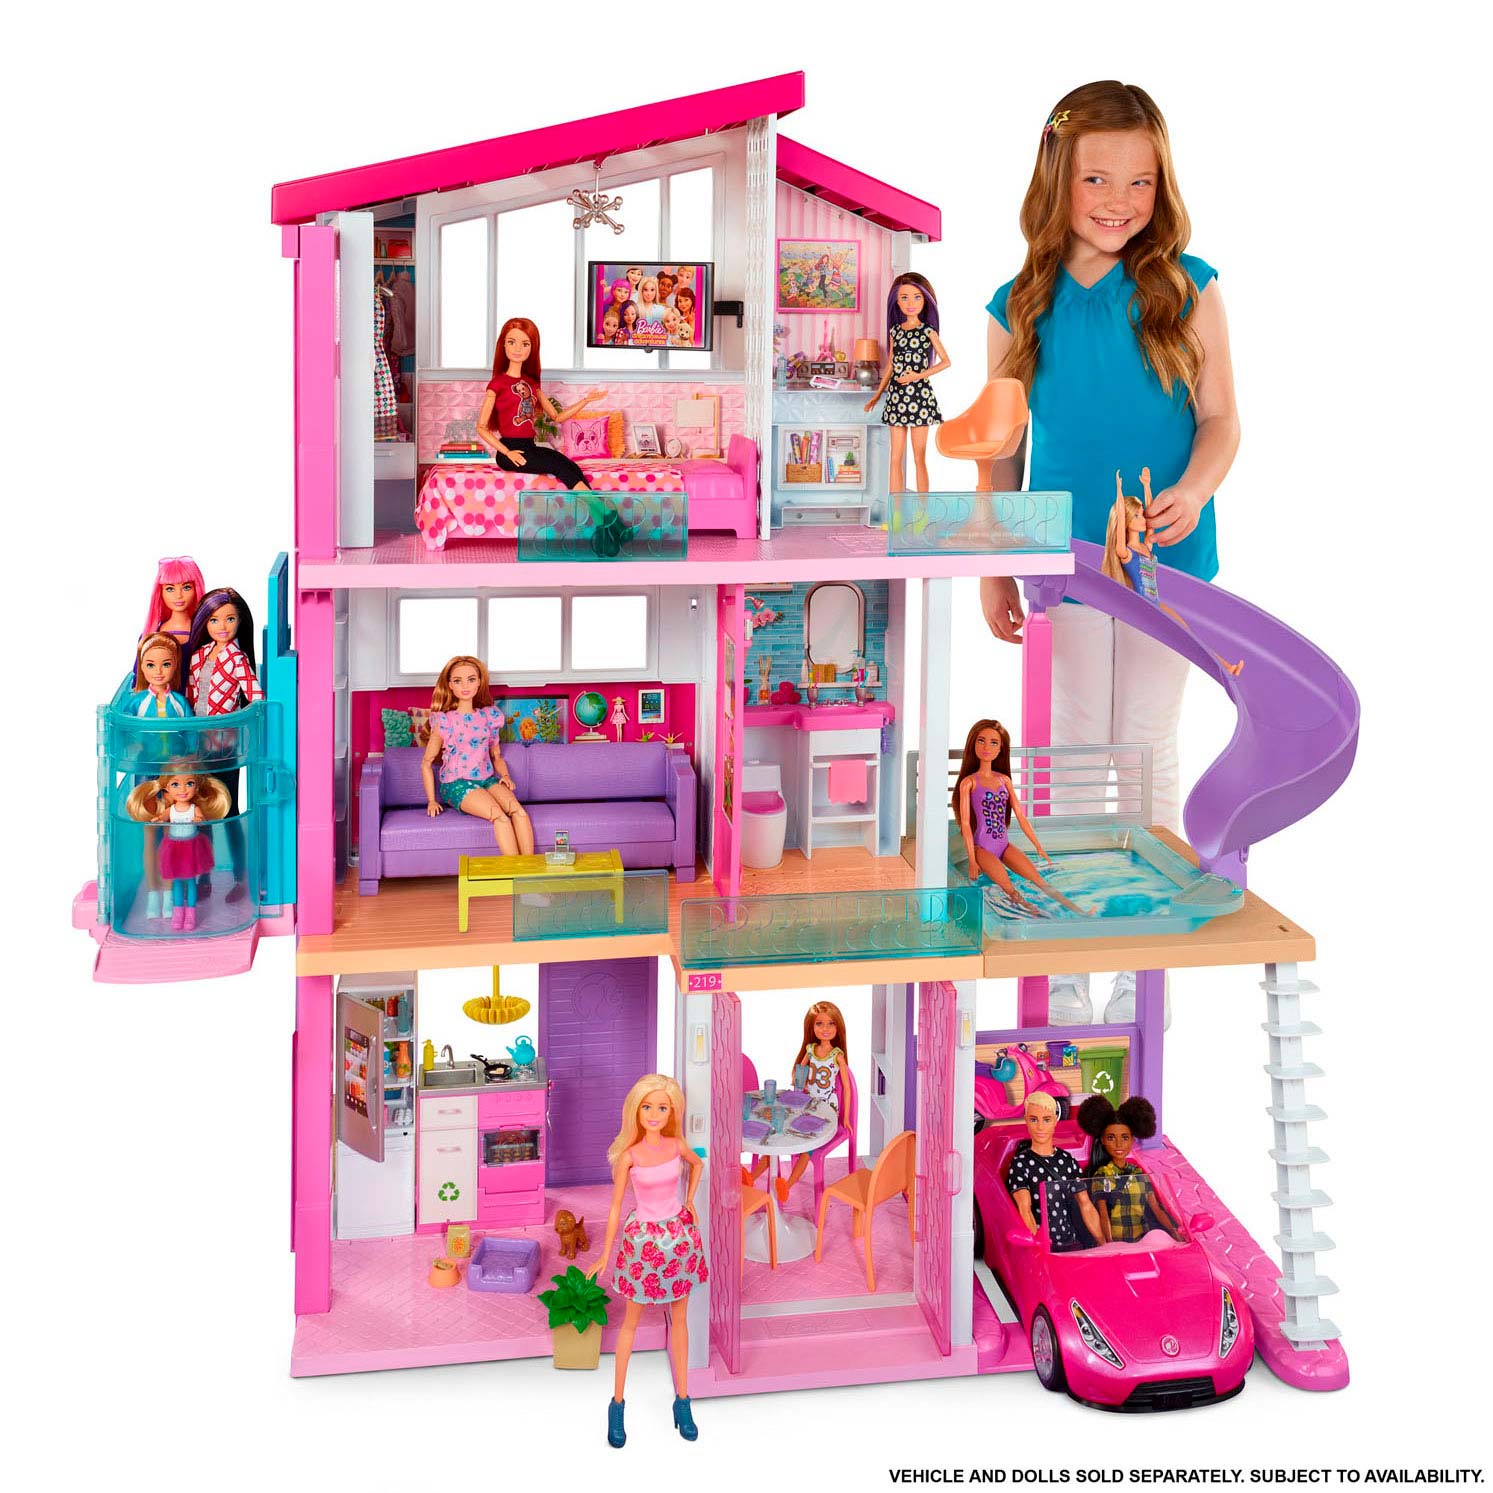 Toeval kruising Politie Barbie Dream House with Lift | Thimble Toys